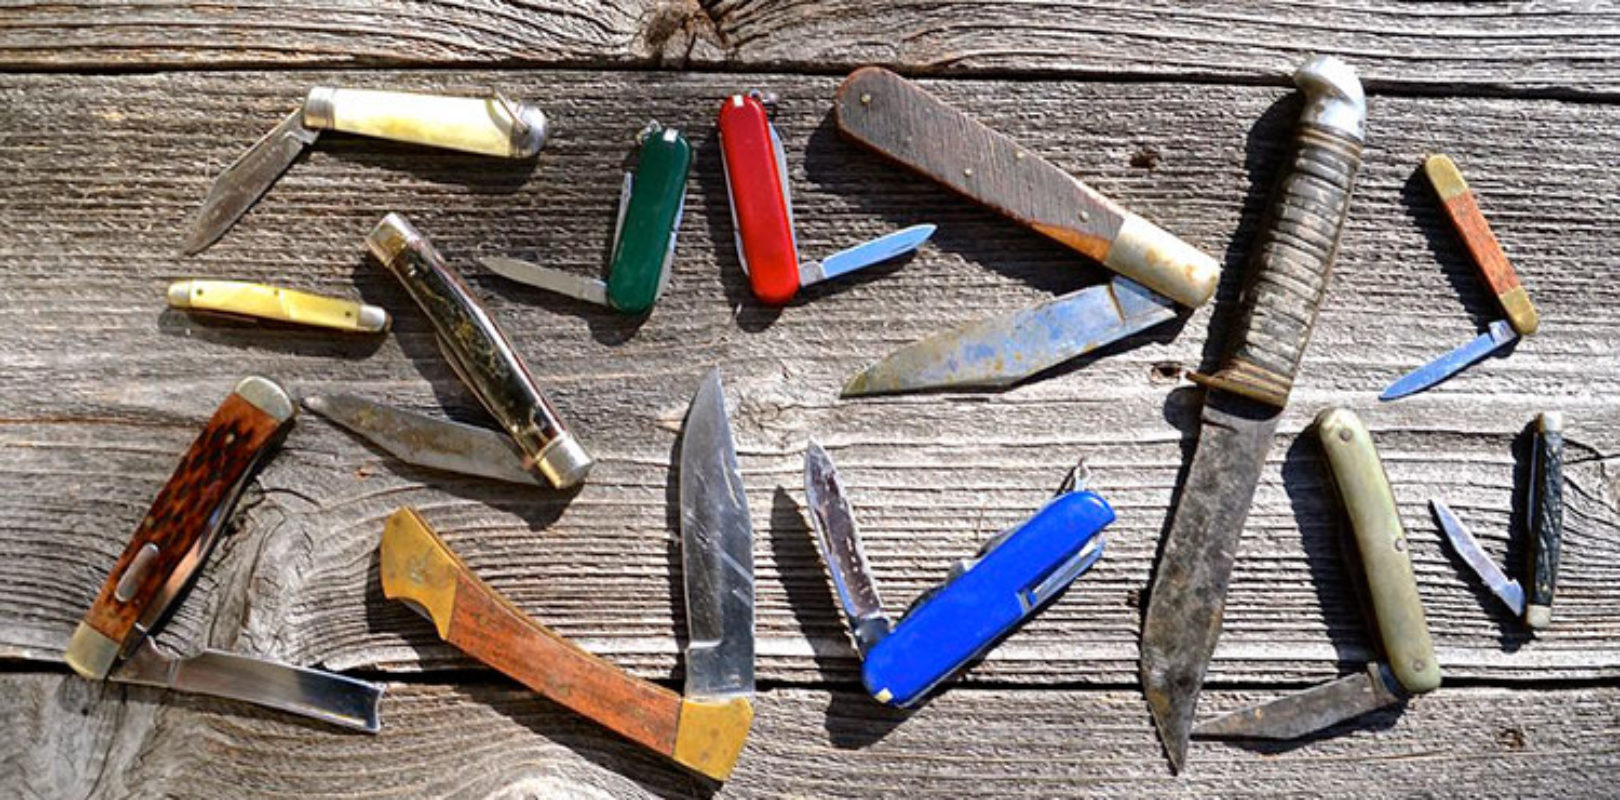 Pocket Knife Rules Laws In The U S Updated For 2020